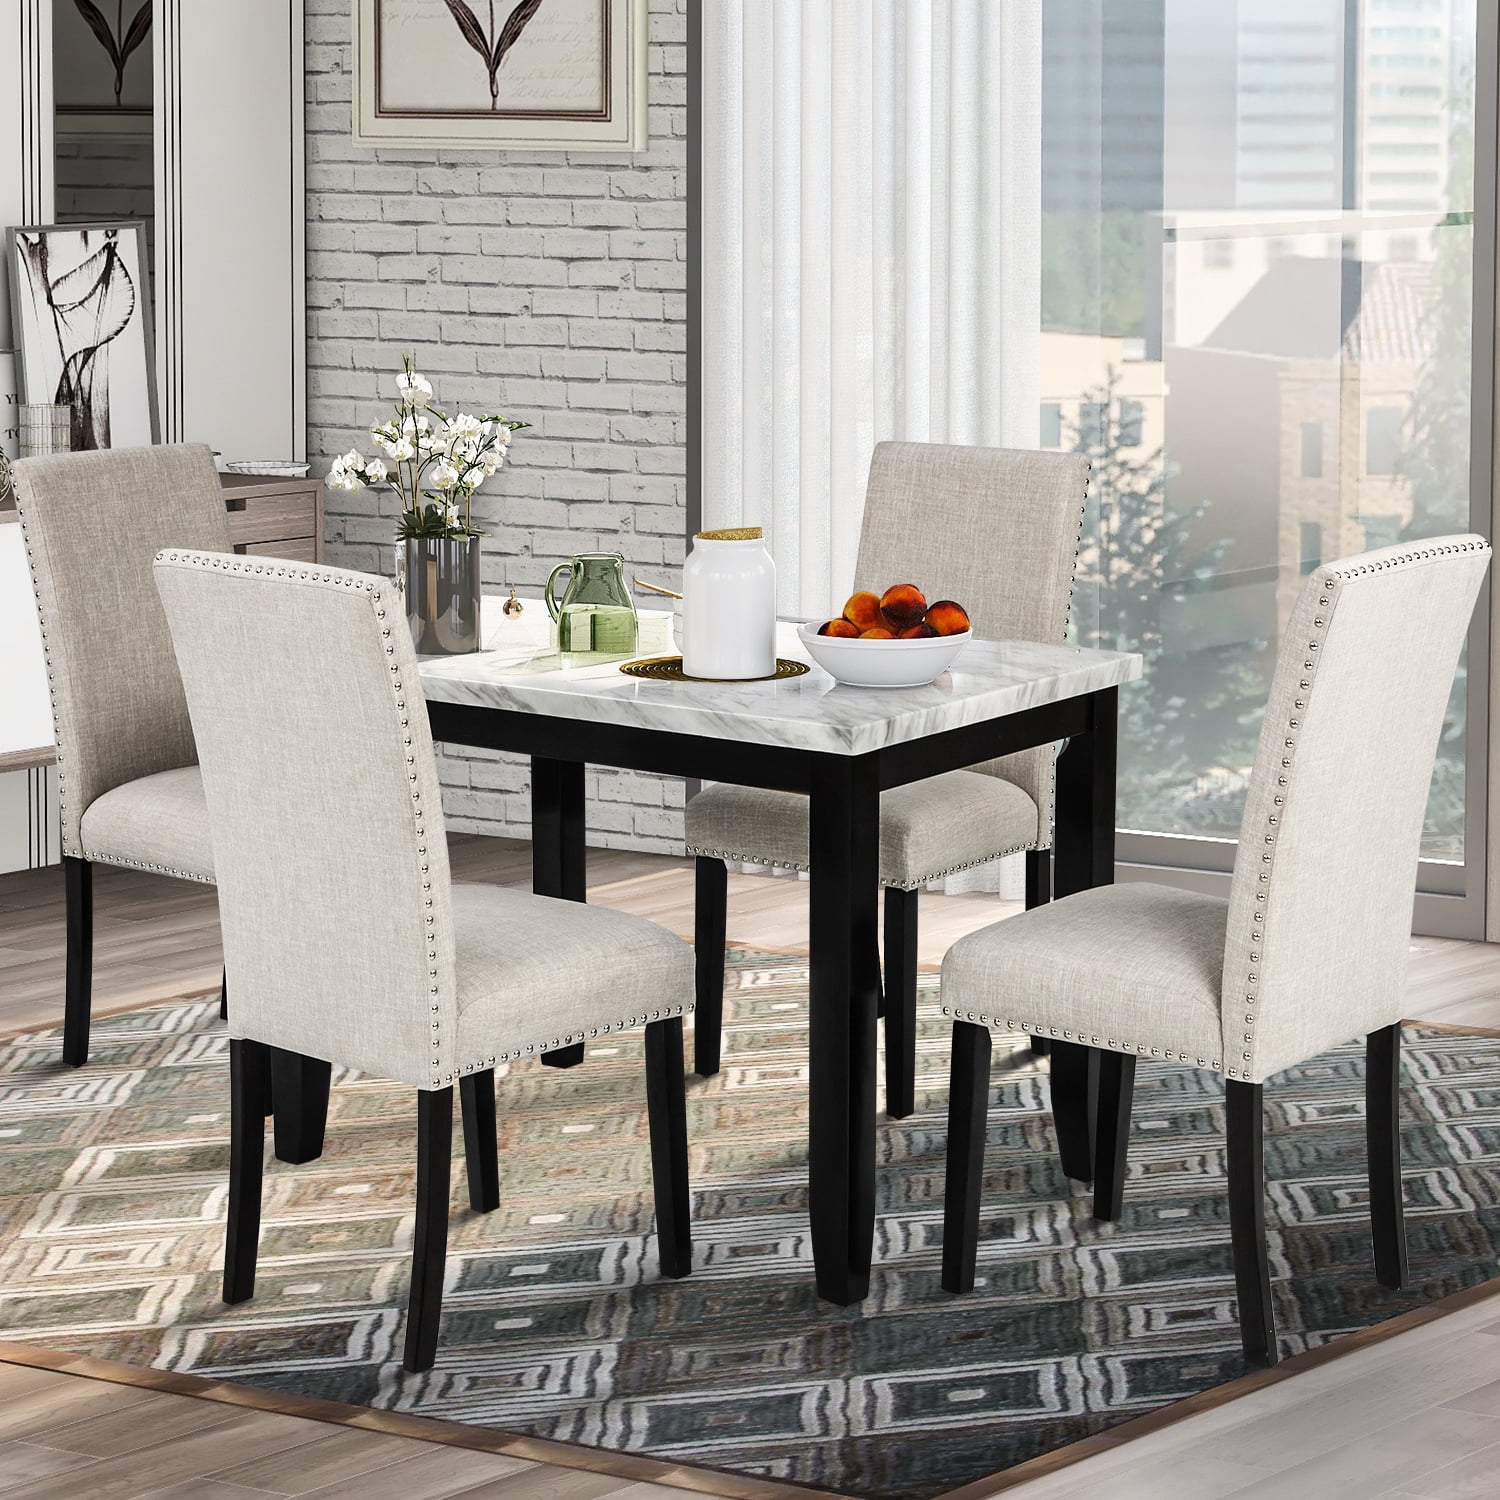 Kepooman 5-Piece Faux Marble Dining Table Set with 4 Thicken Cushion